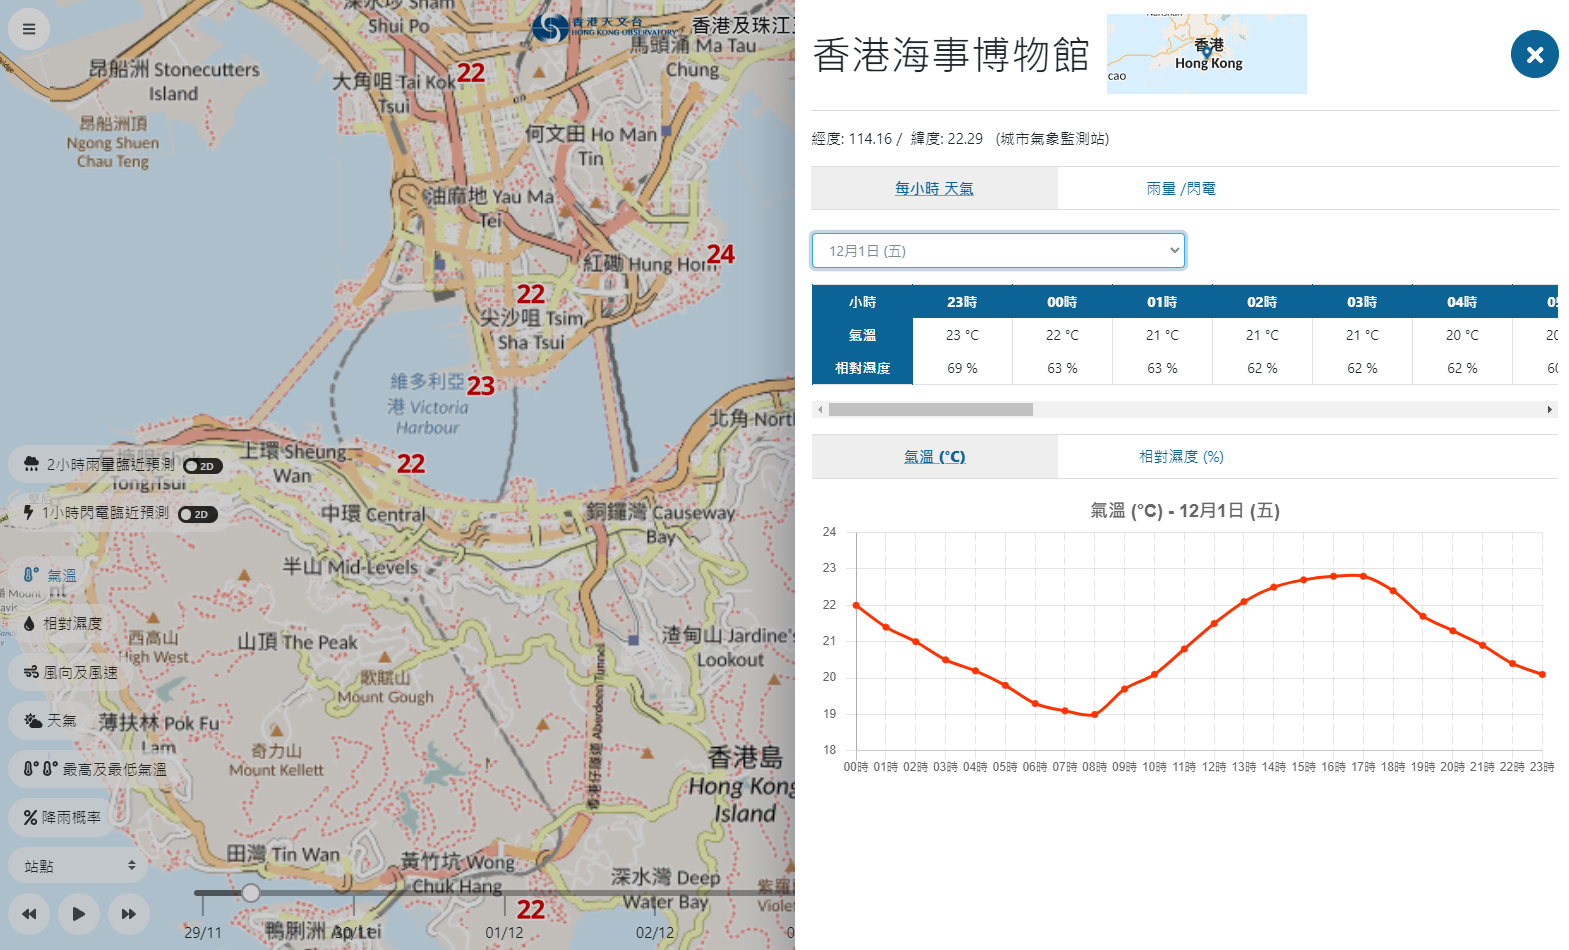 The “Automatic Regional Weather Forecast in Hong Kong & Pearl River Delta Region” service, enhanced with observations and forecasts of temperature and relative humidity at the urban meteorological monitoring station at the Hong Kong Maritime Museum